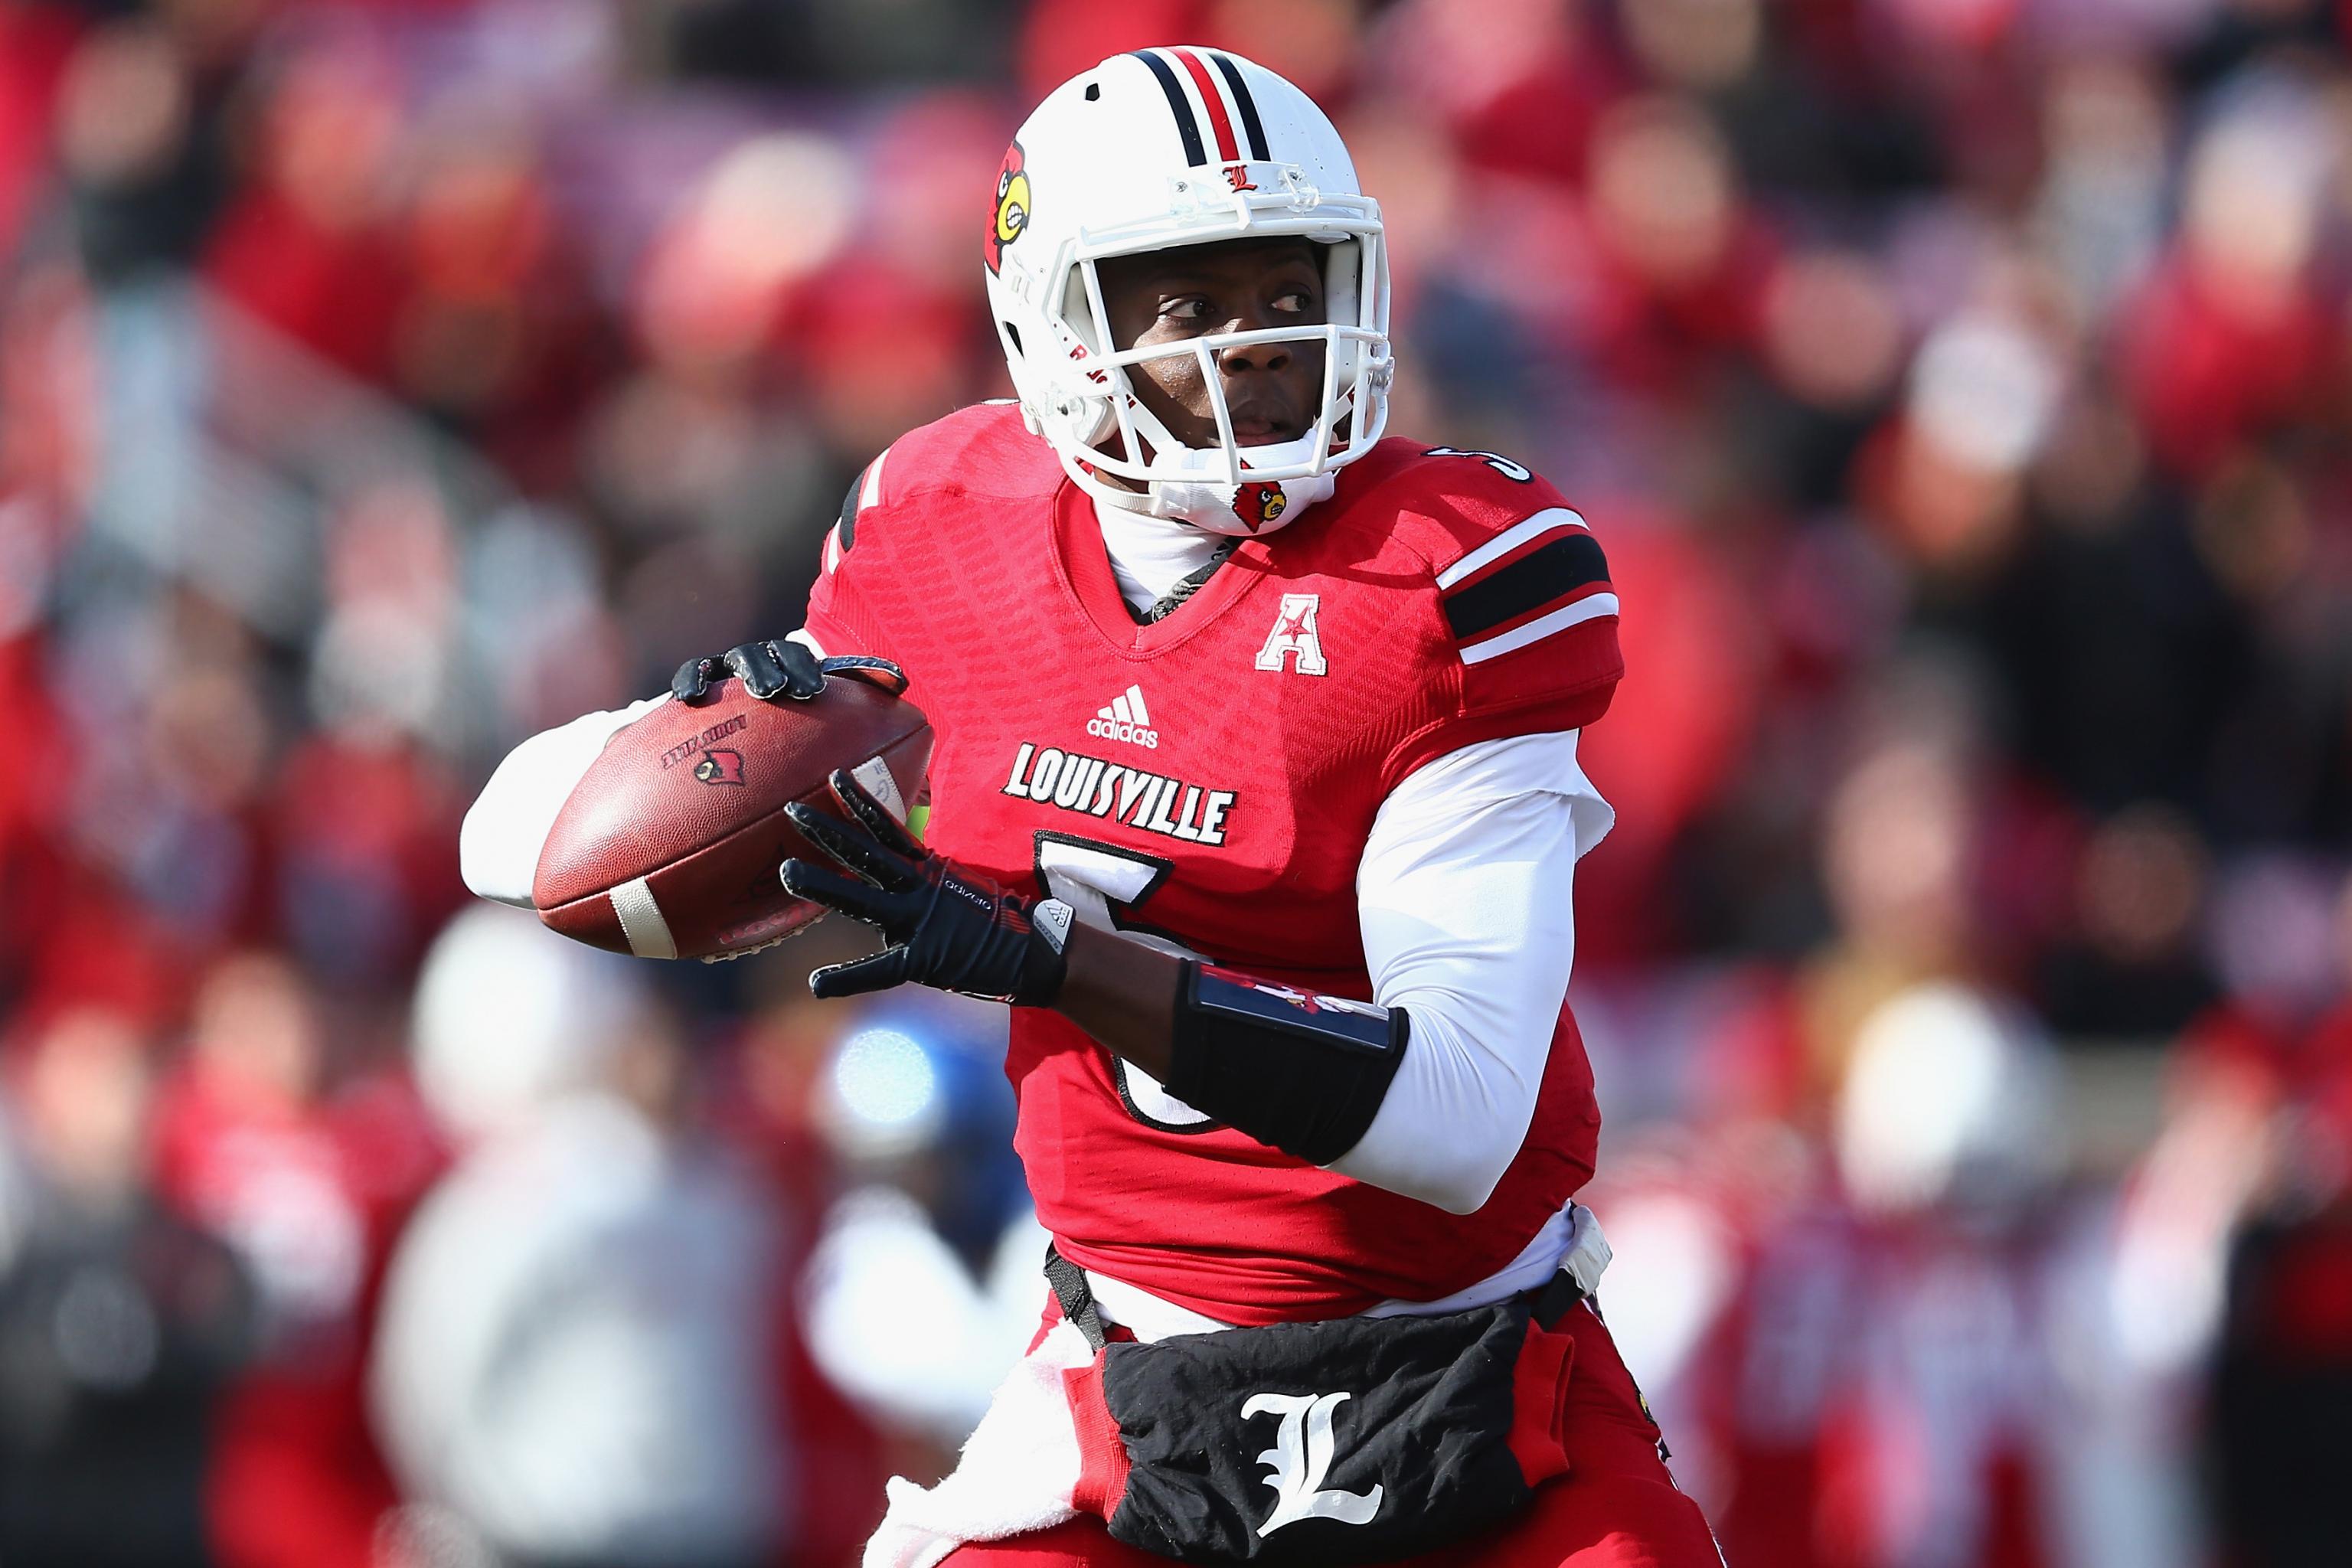 Louisville will wear all red uniforms for Citrus Bowl game against